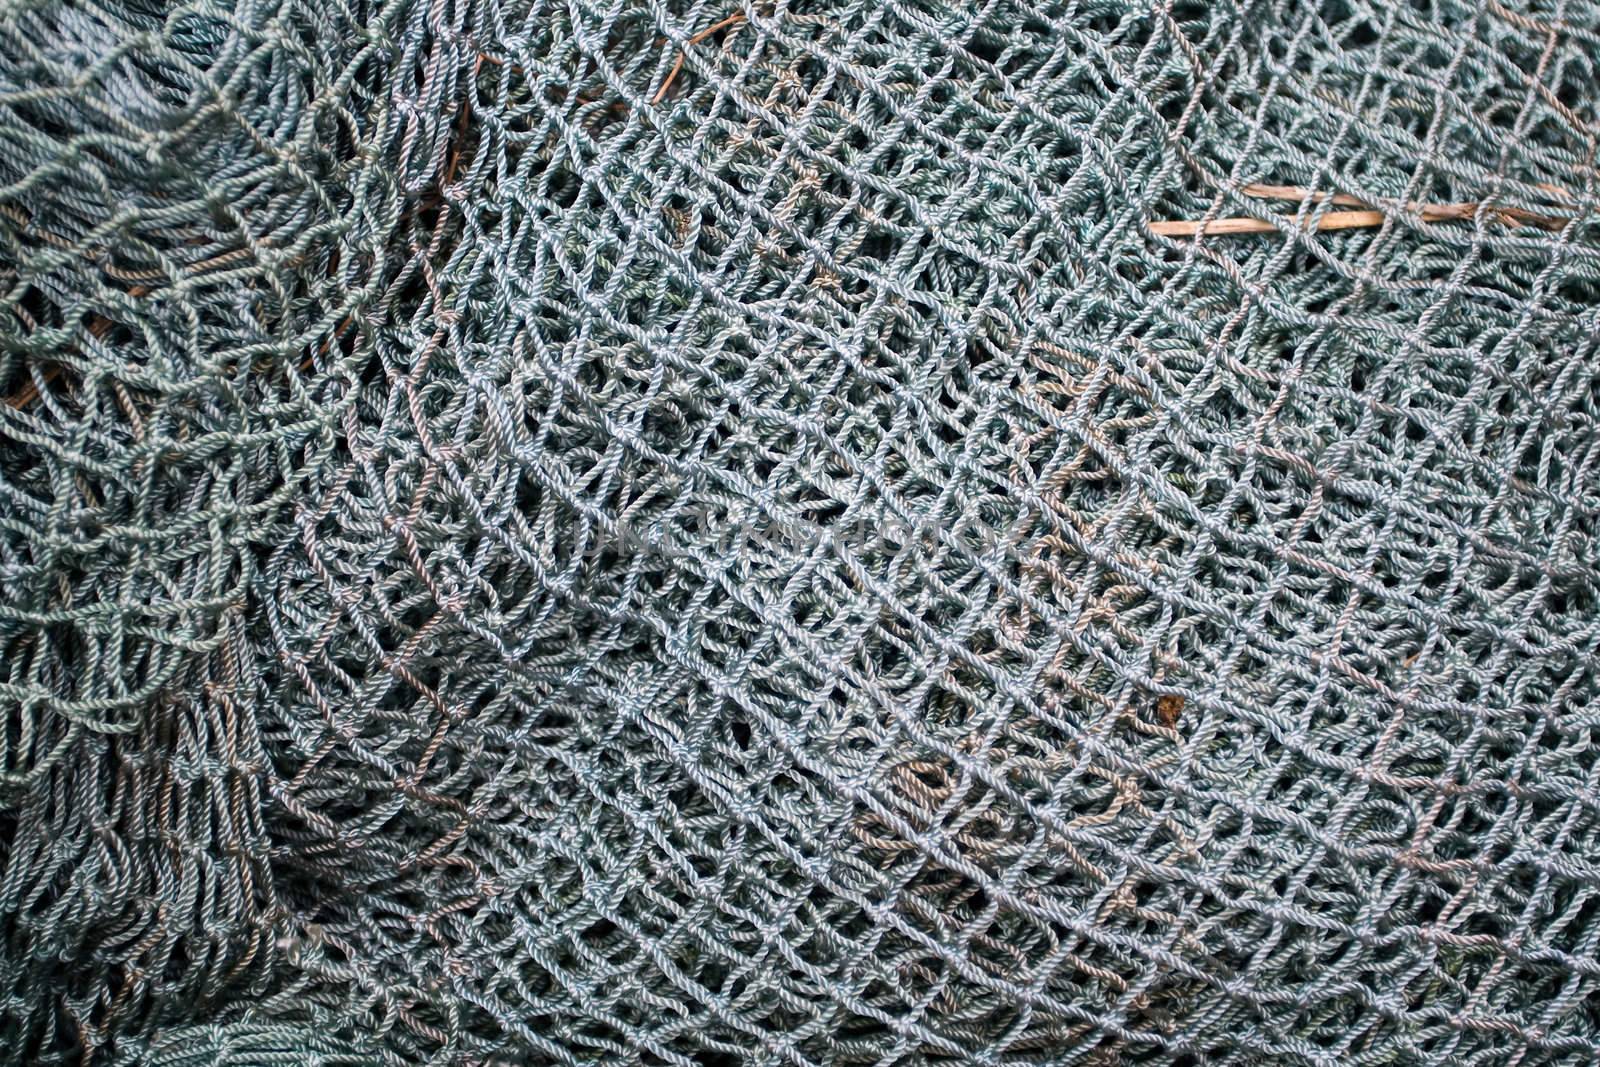 Fishing net background by ints